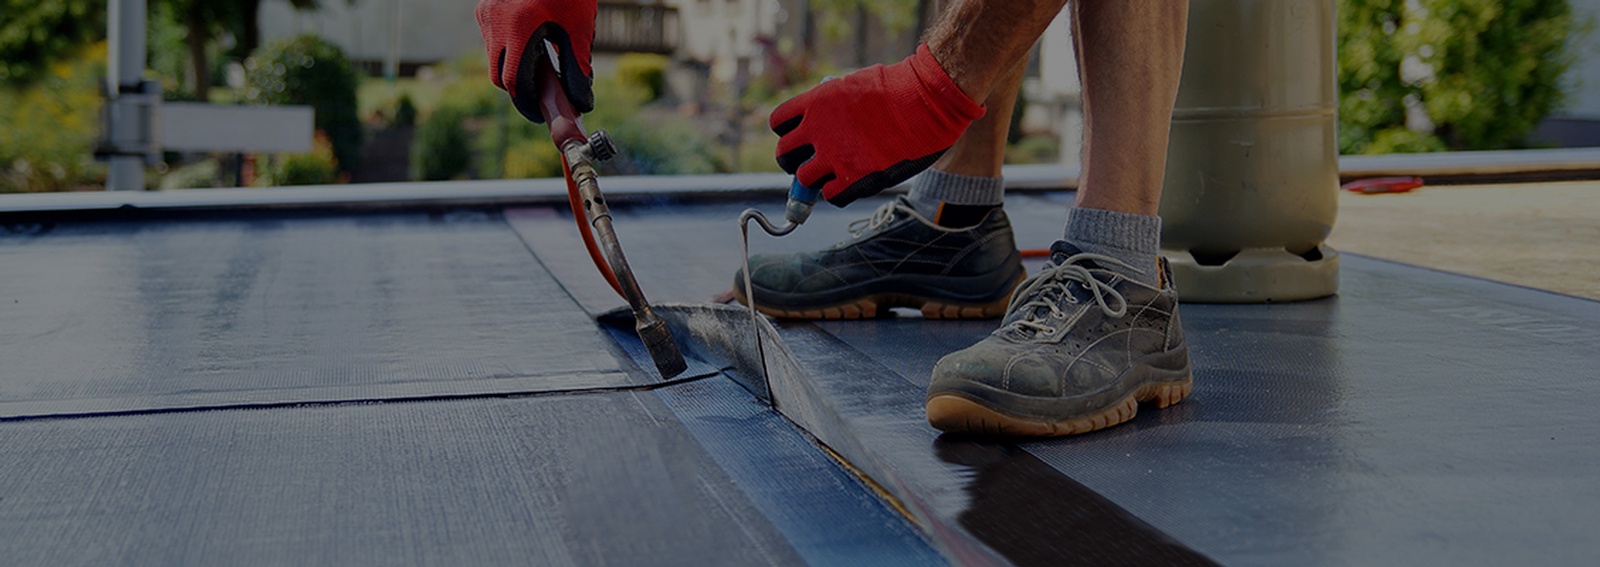 London Roofing Services